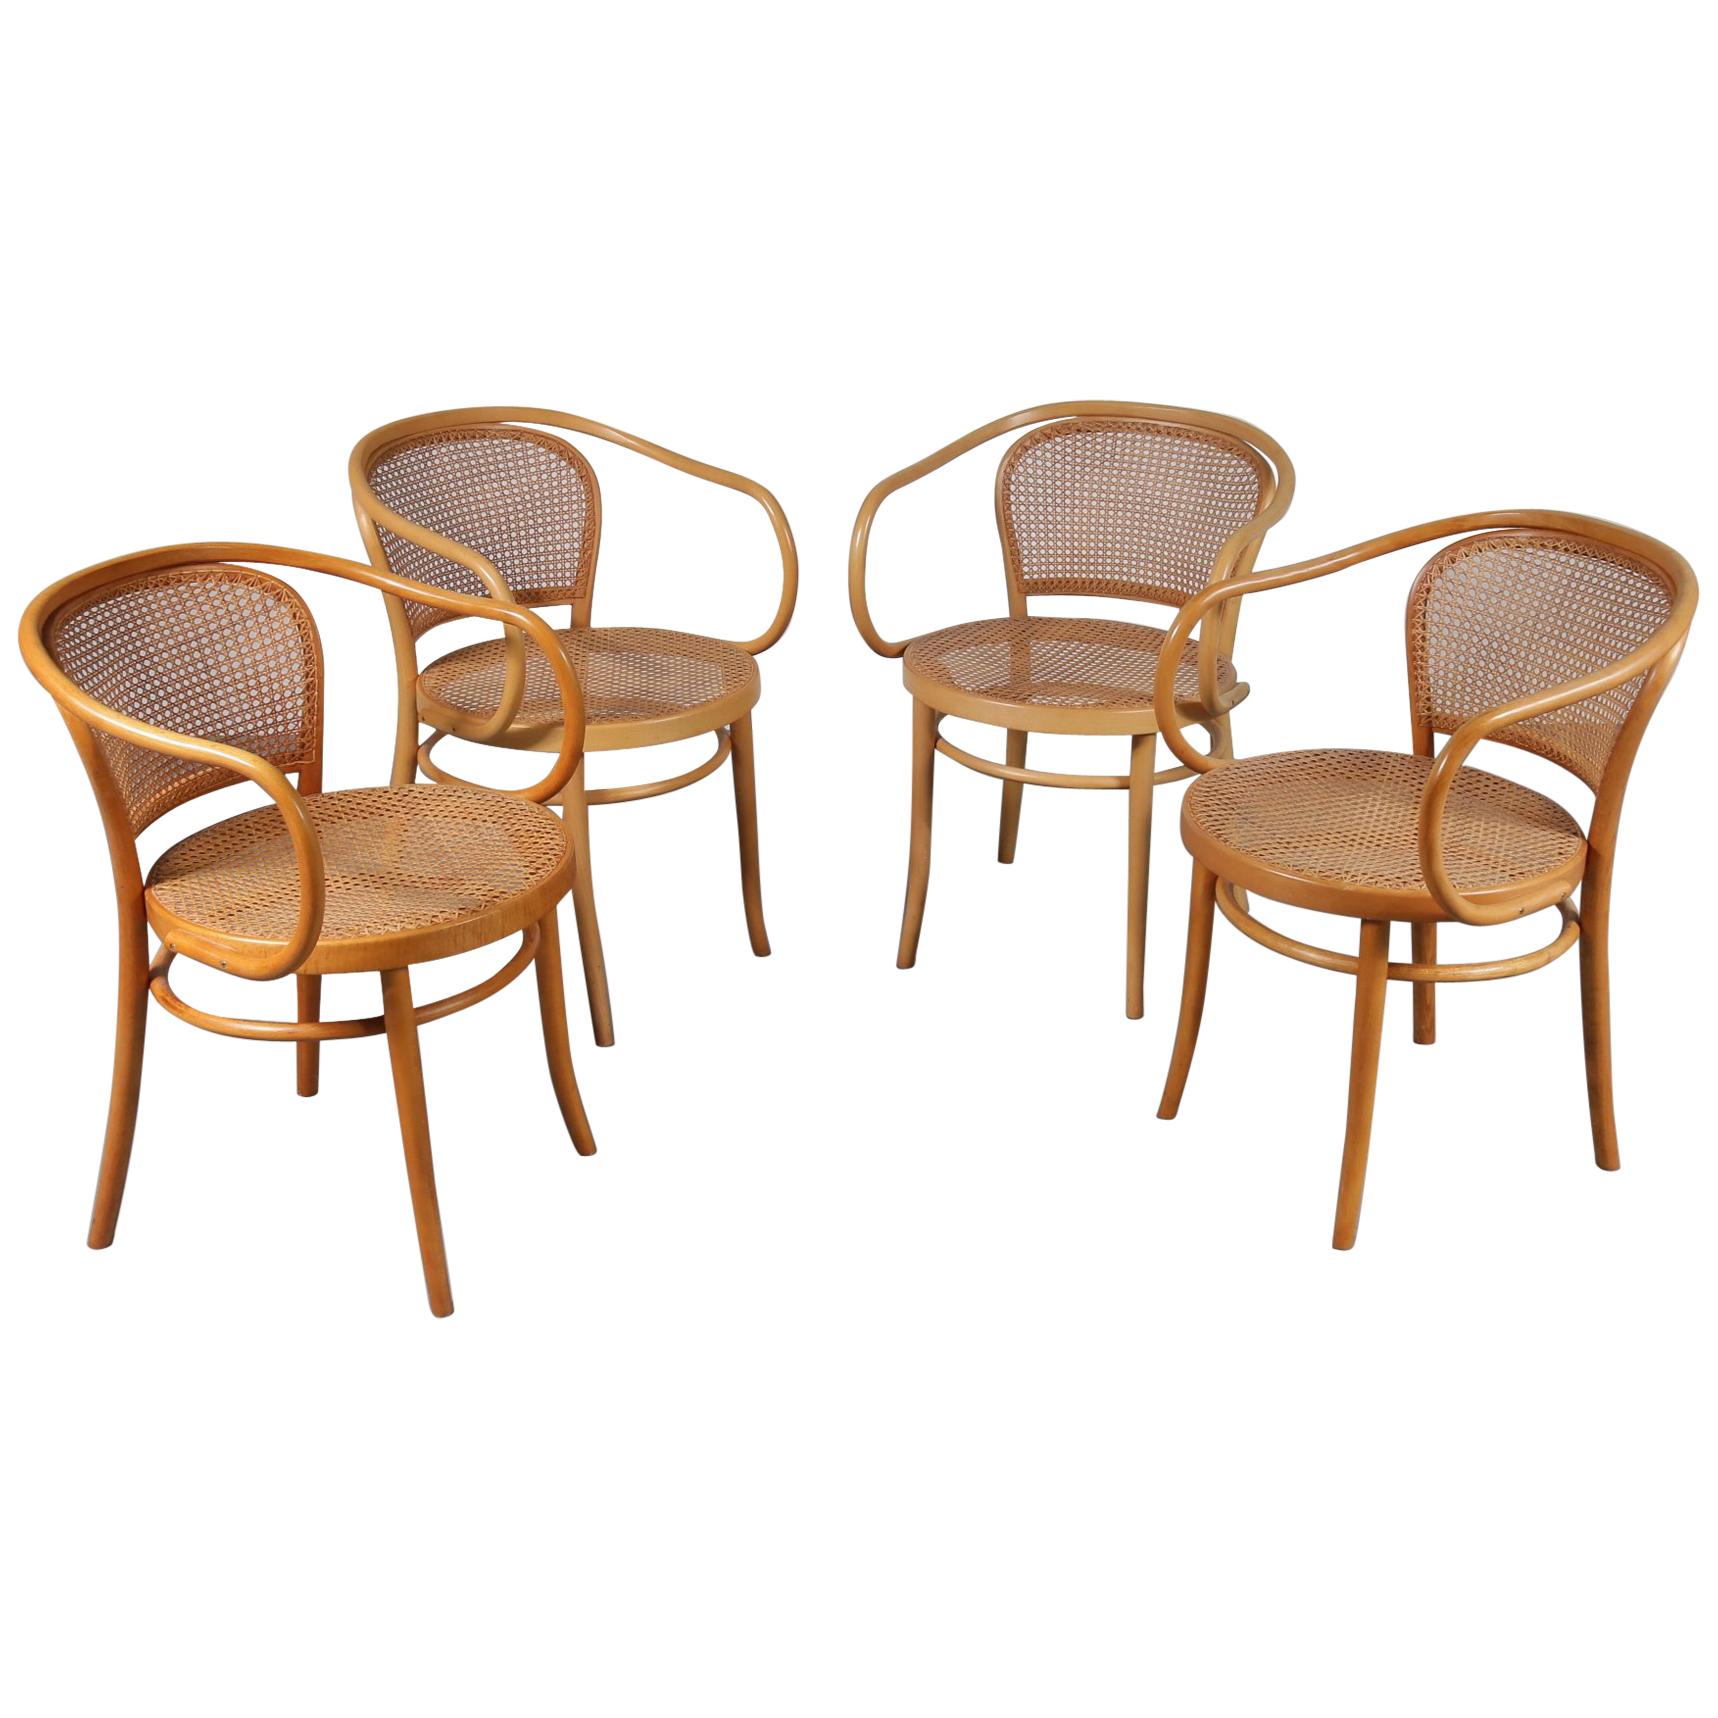 Set of Four Corbusier Armchairs by Michael Thonet, Germany 1920